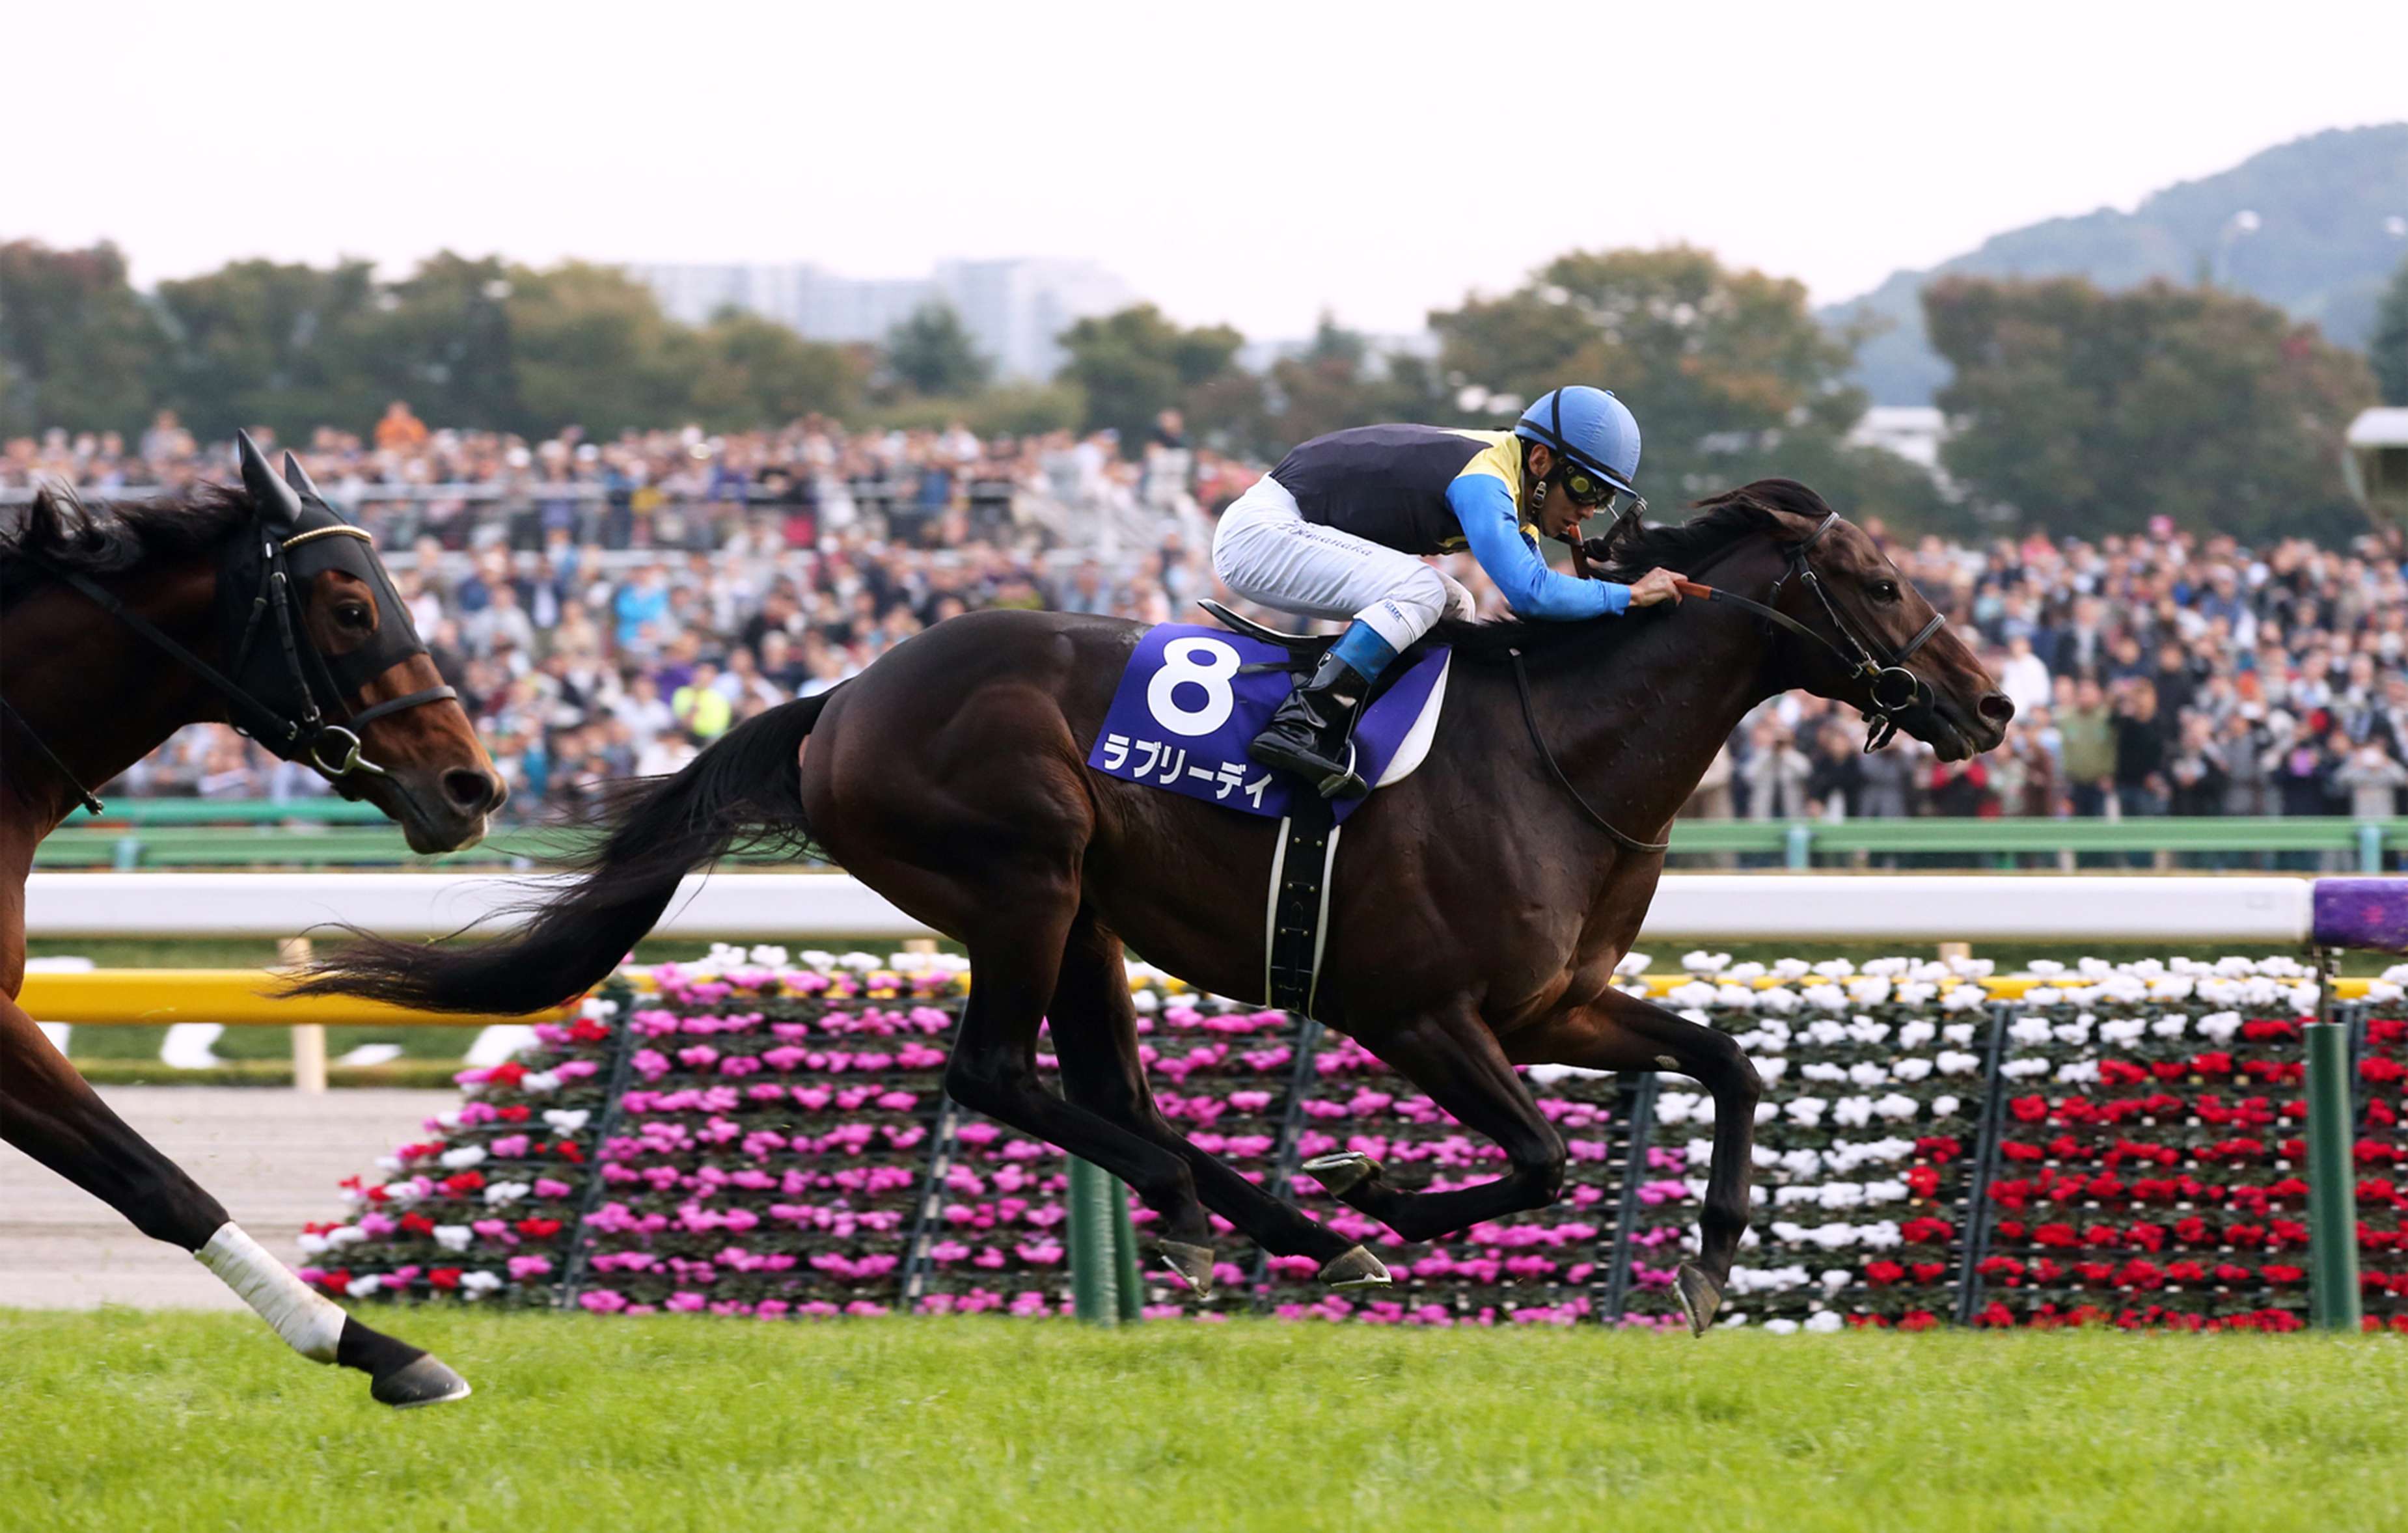 Lovely Day (Suguru Hamanaka) wins the Tenno Sho (Autumn) in November. Yasutoshi Ikee's son of King Kamehameha is the horse to beat in today’s Audemars Piguet QE II Cup. Photo: Japan Racing Association